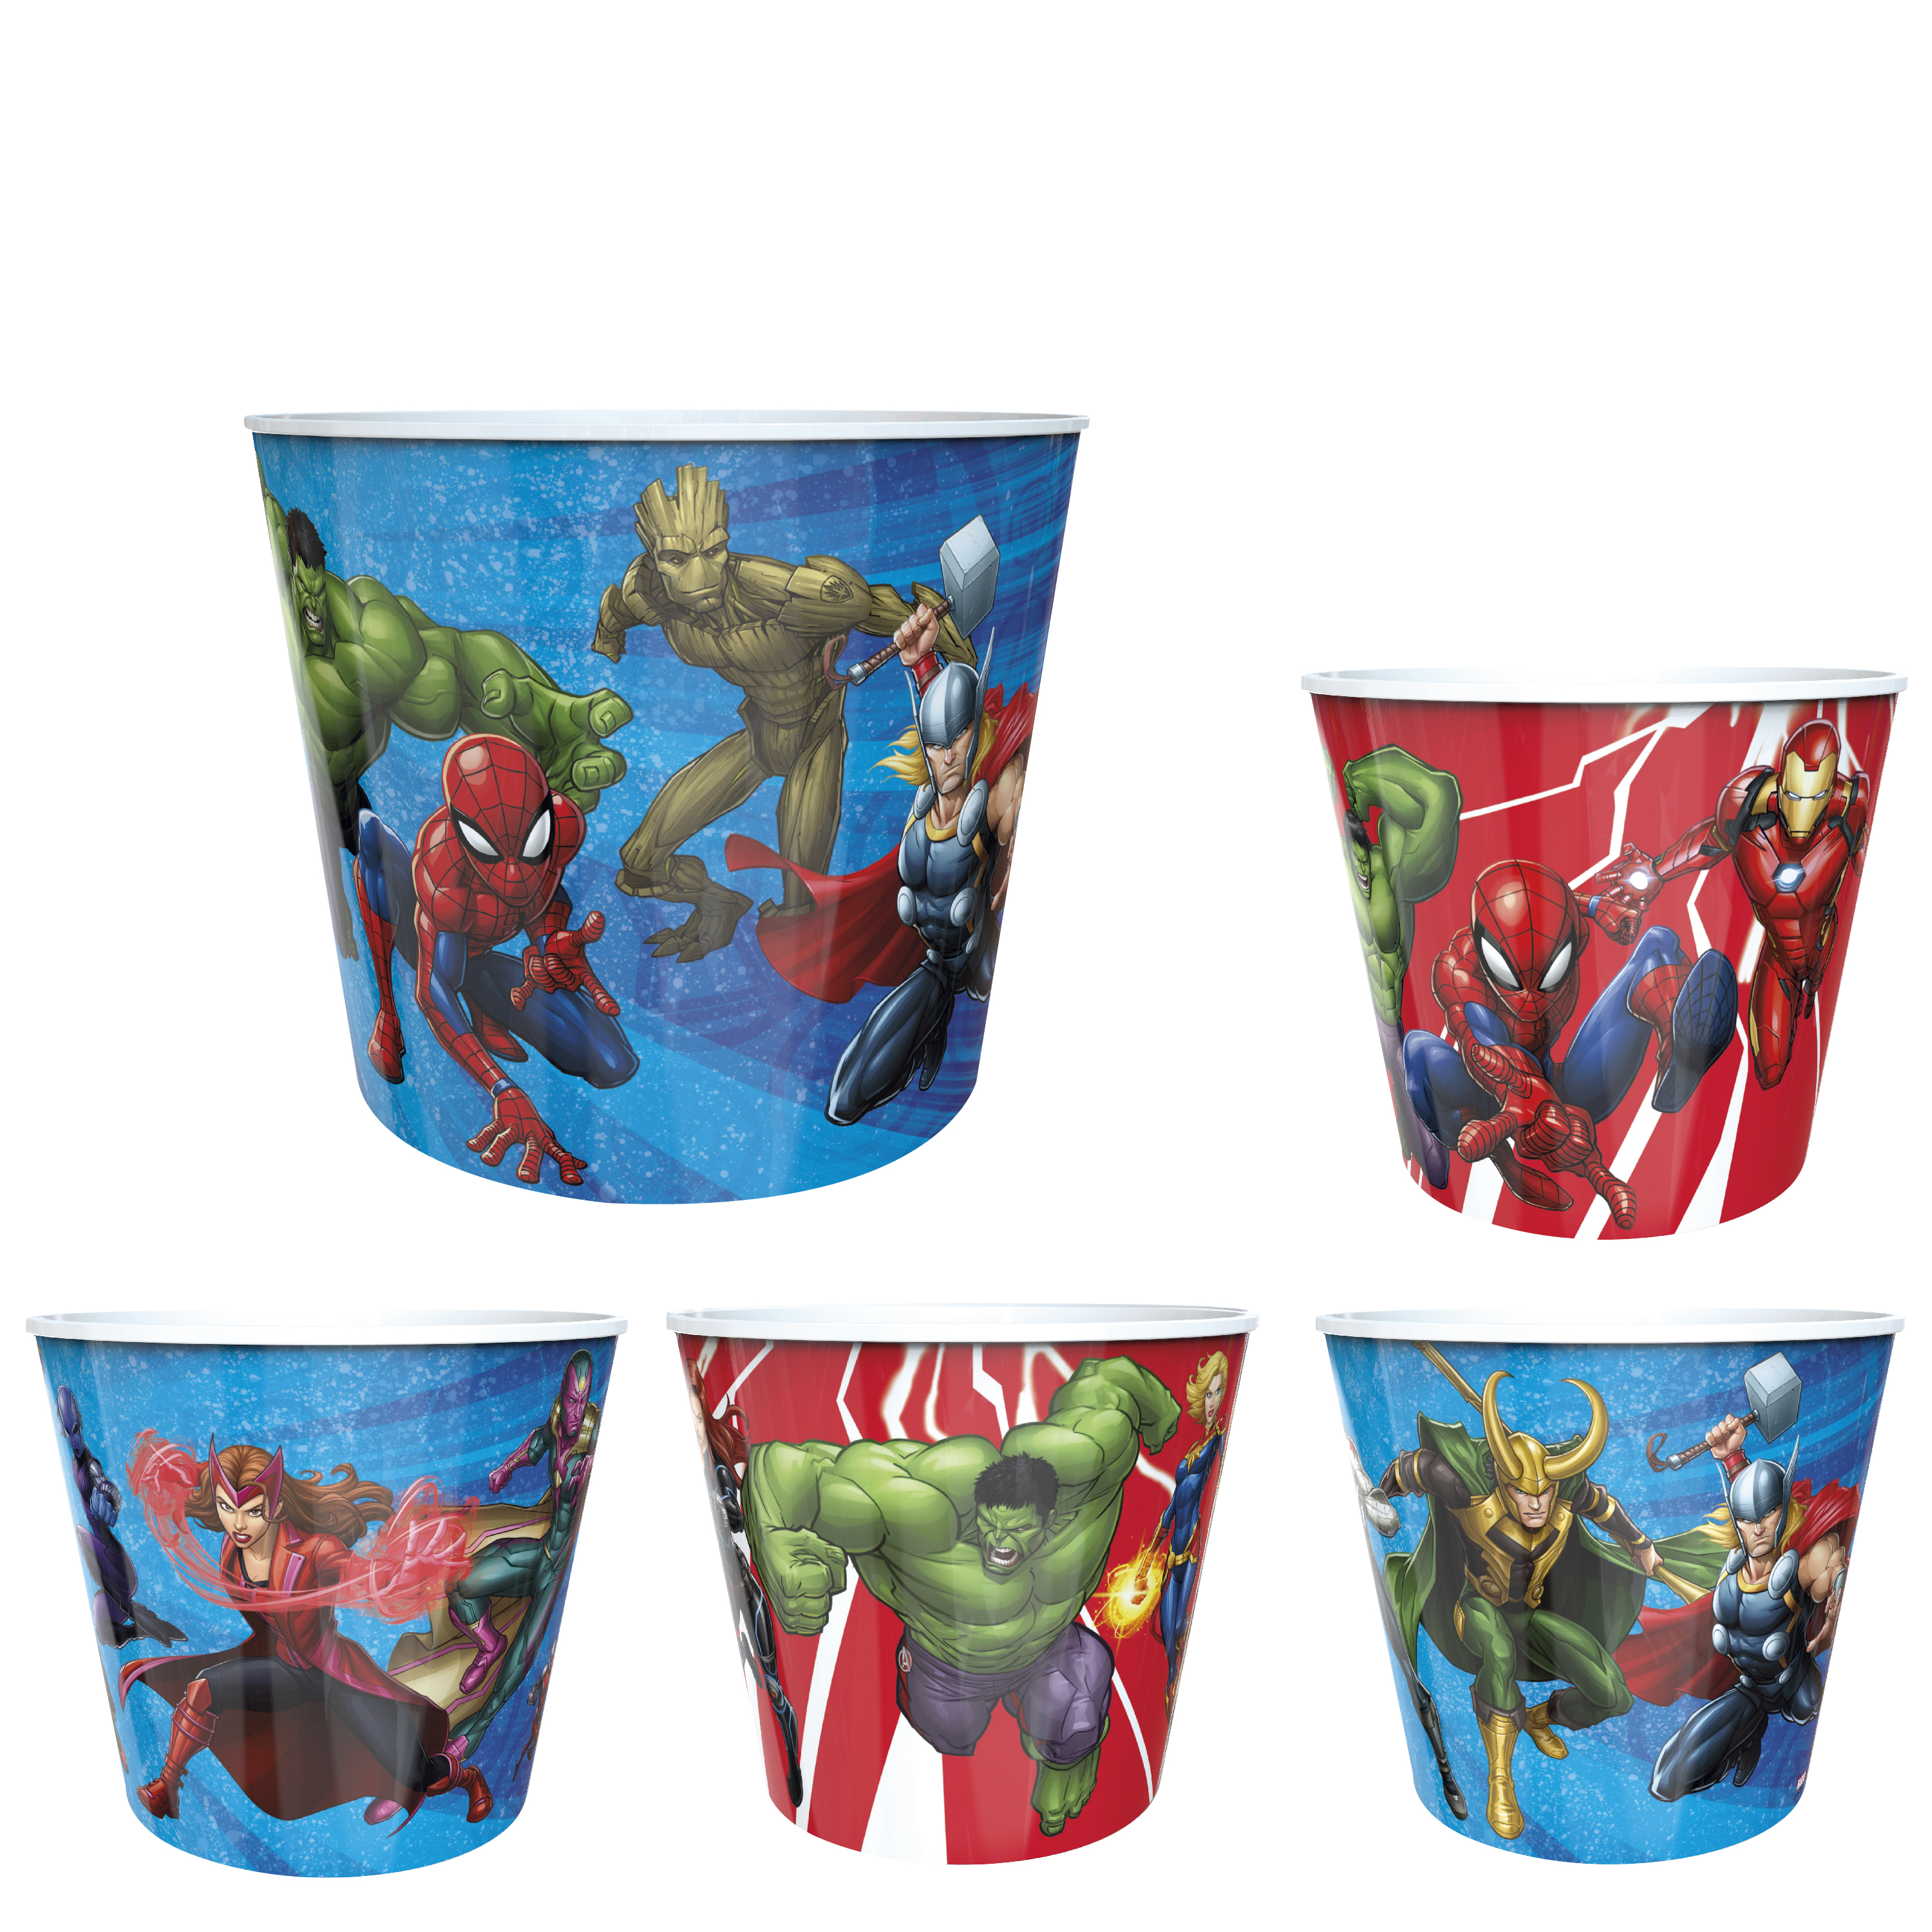 Marvel Comics Plastic Popcorn Container and Bowls, The Hulk, Spider-Man and More, 5-piece set slideshow image 1